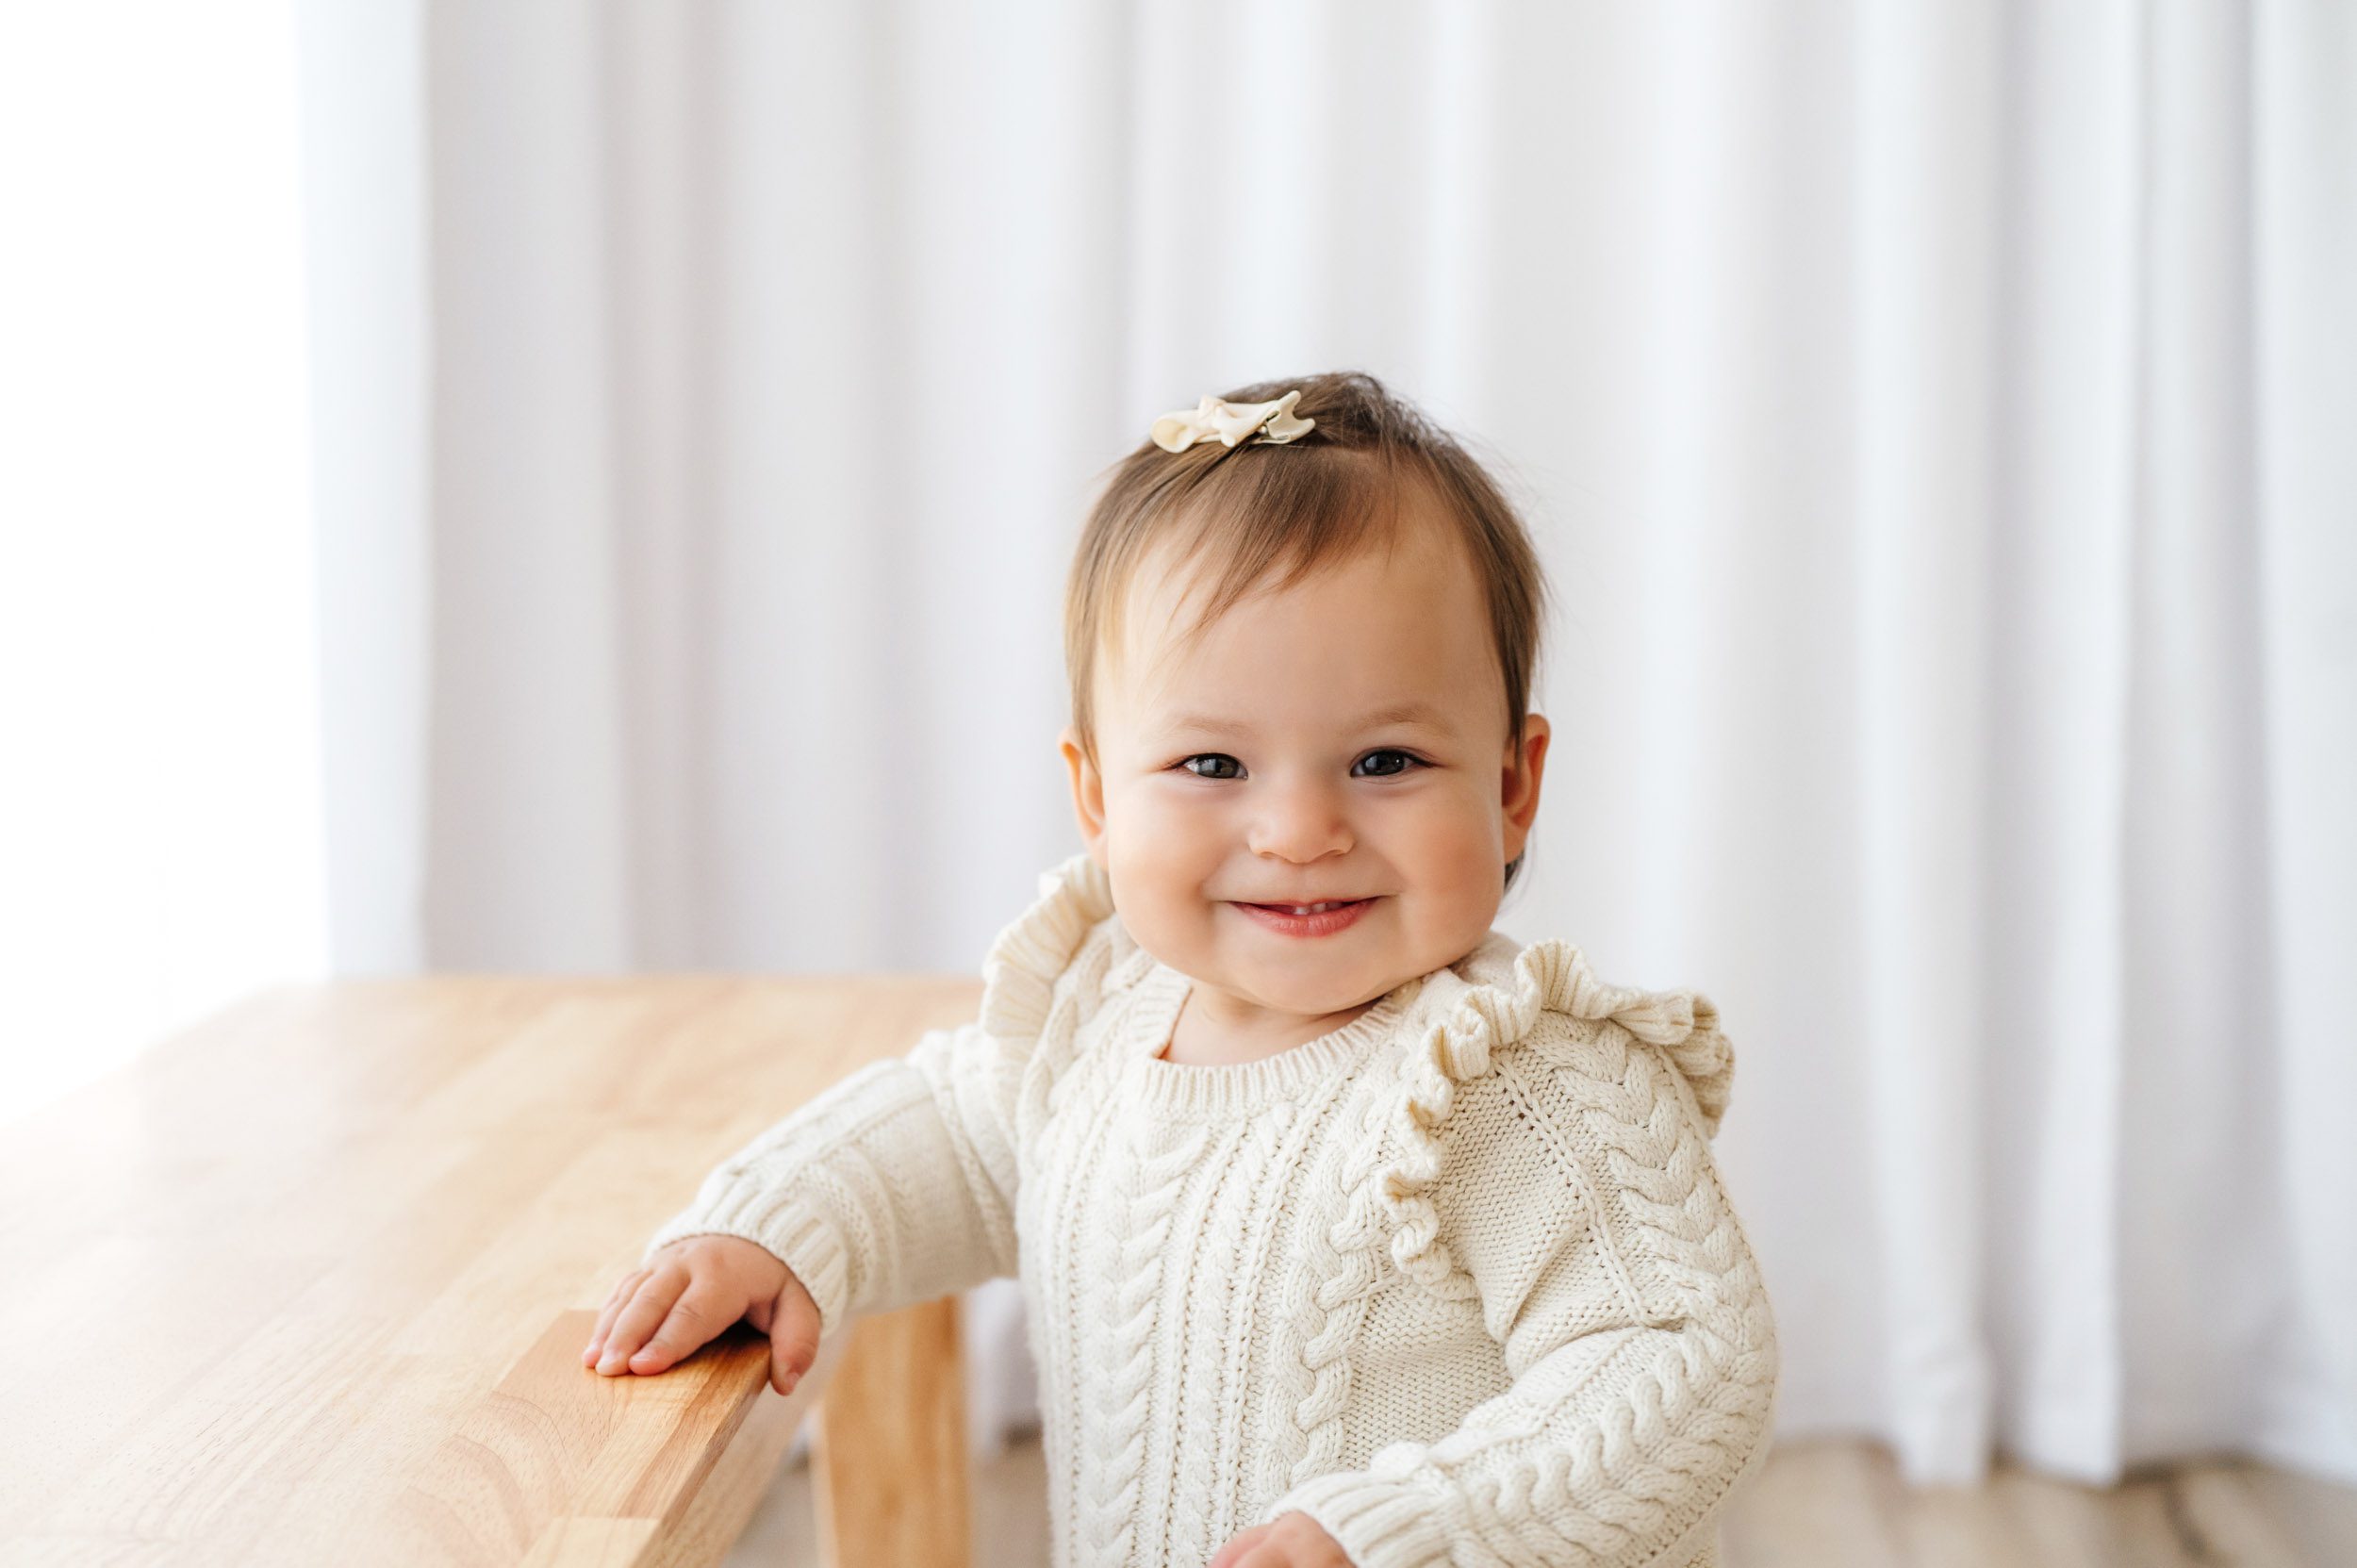 a little girl wearing an ivory cable knit jumper dress standing and holding onto a wood bench as she looks directly at the camera with a toothy grin during a Pottstown baby photography session